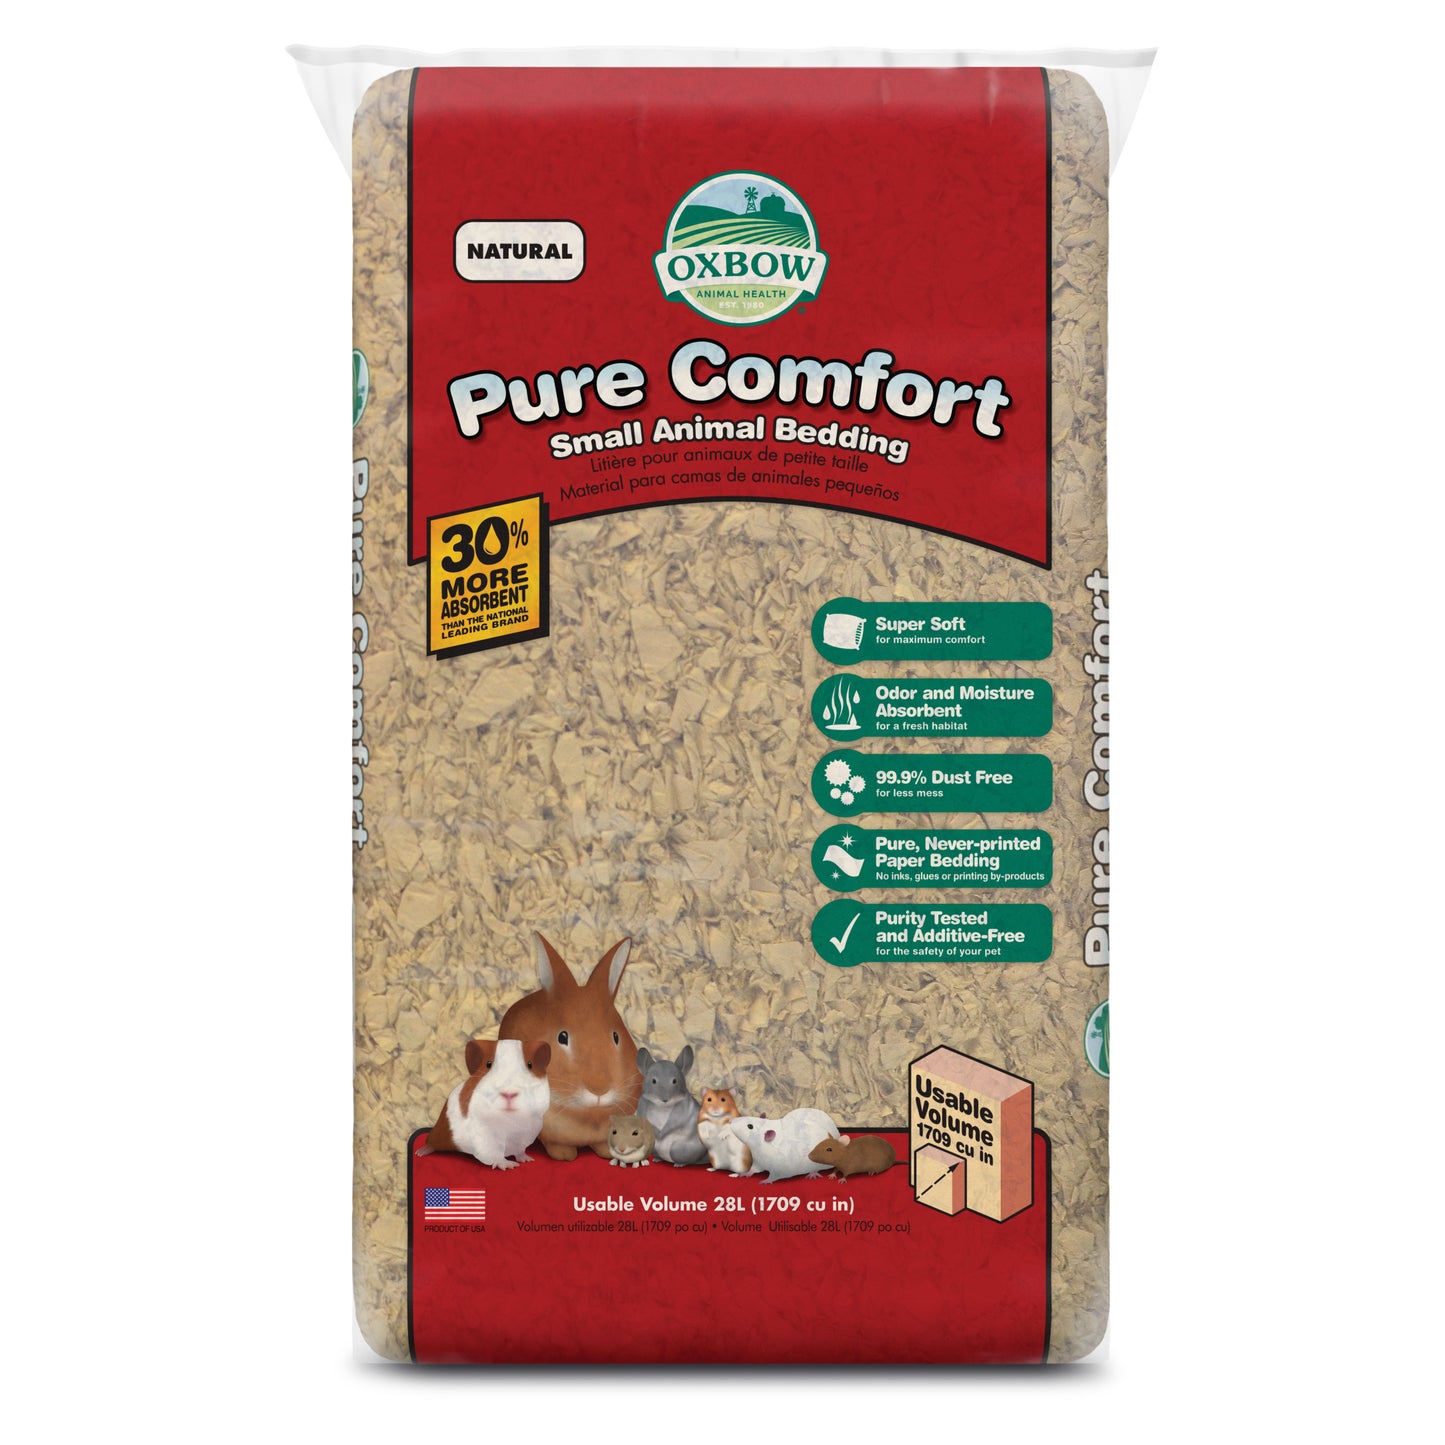 Pure Comfort Bedding - Oxbow Natural